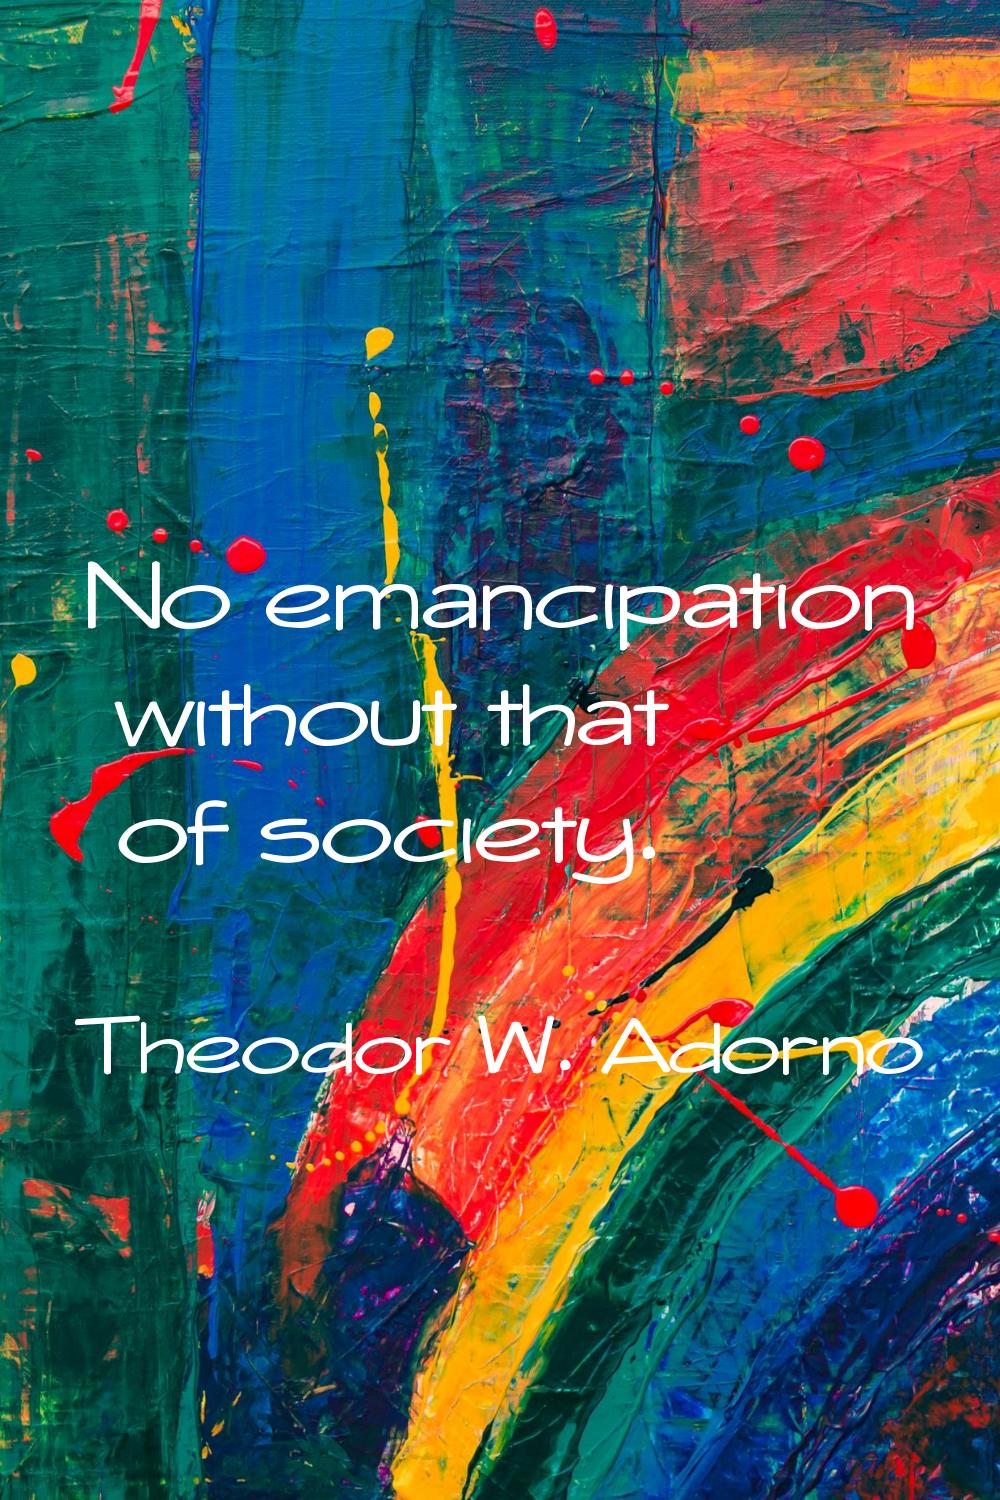 No emancipation without that of society.